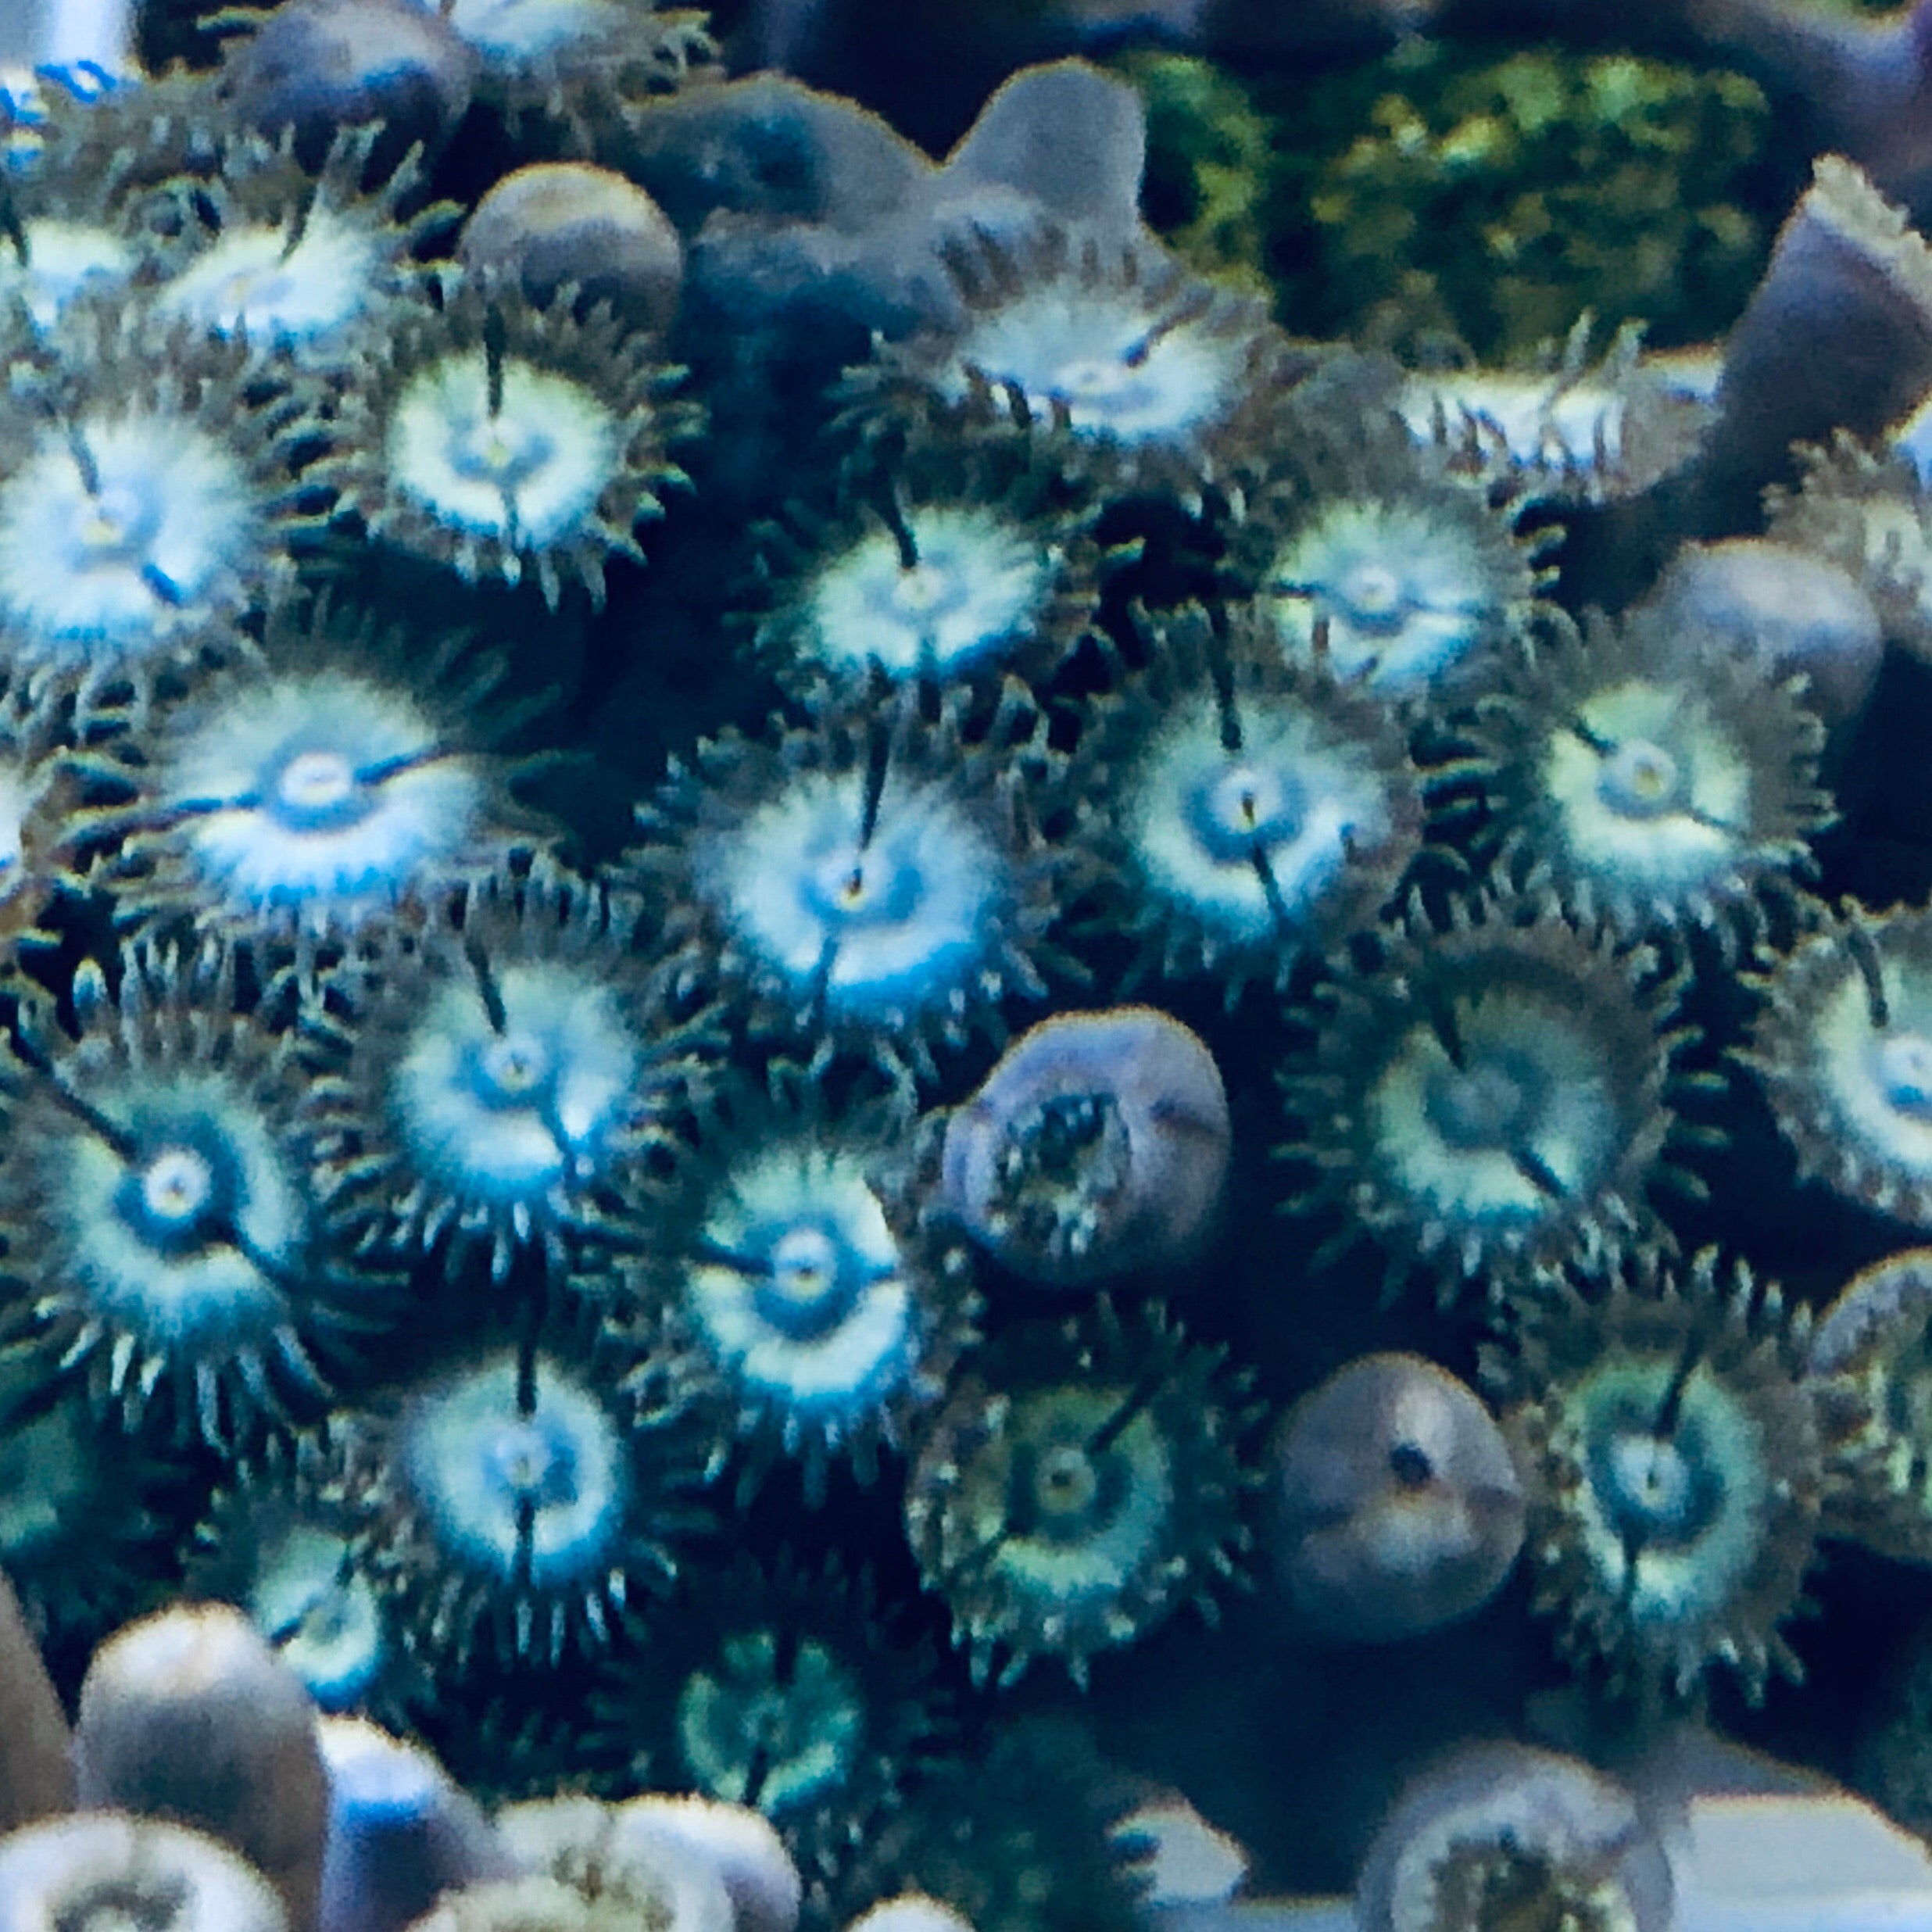 SPECIAL-Blue Caribbean Zoanthid Frag